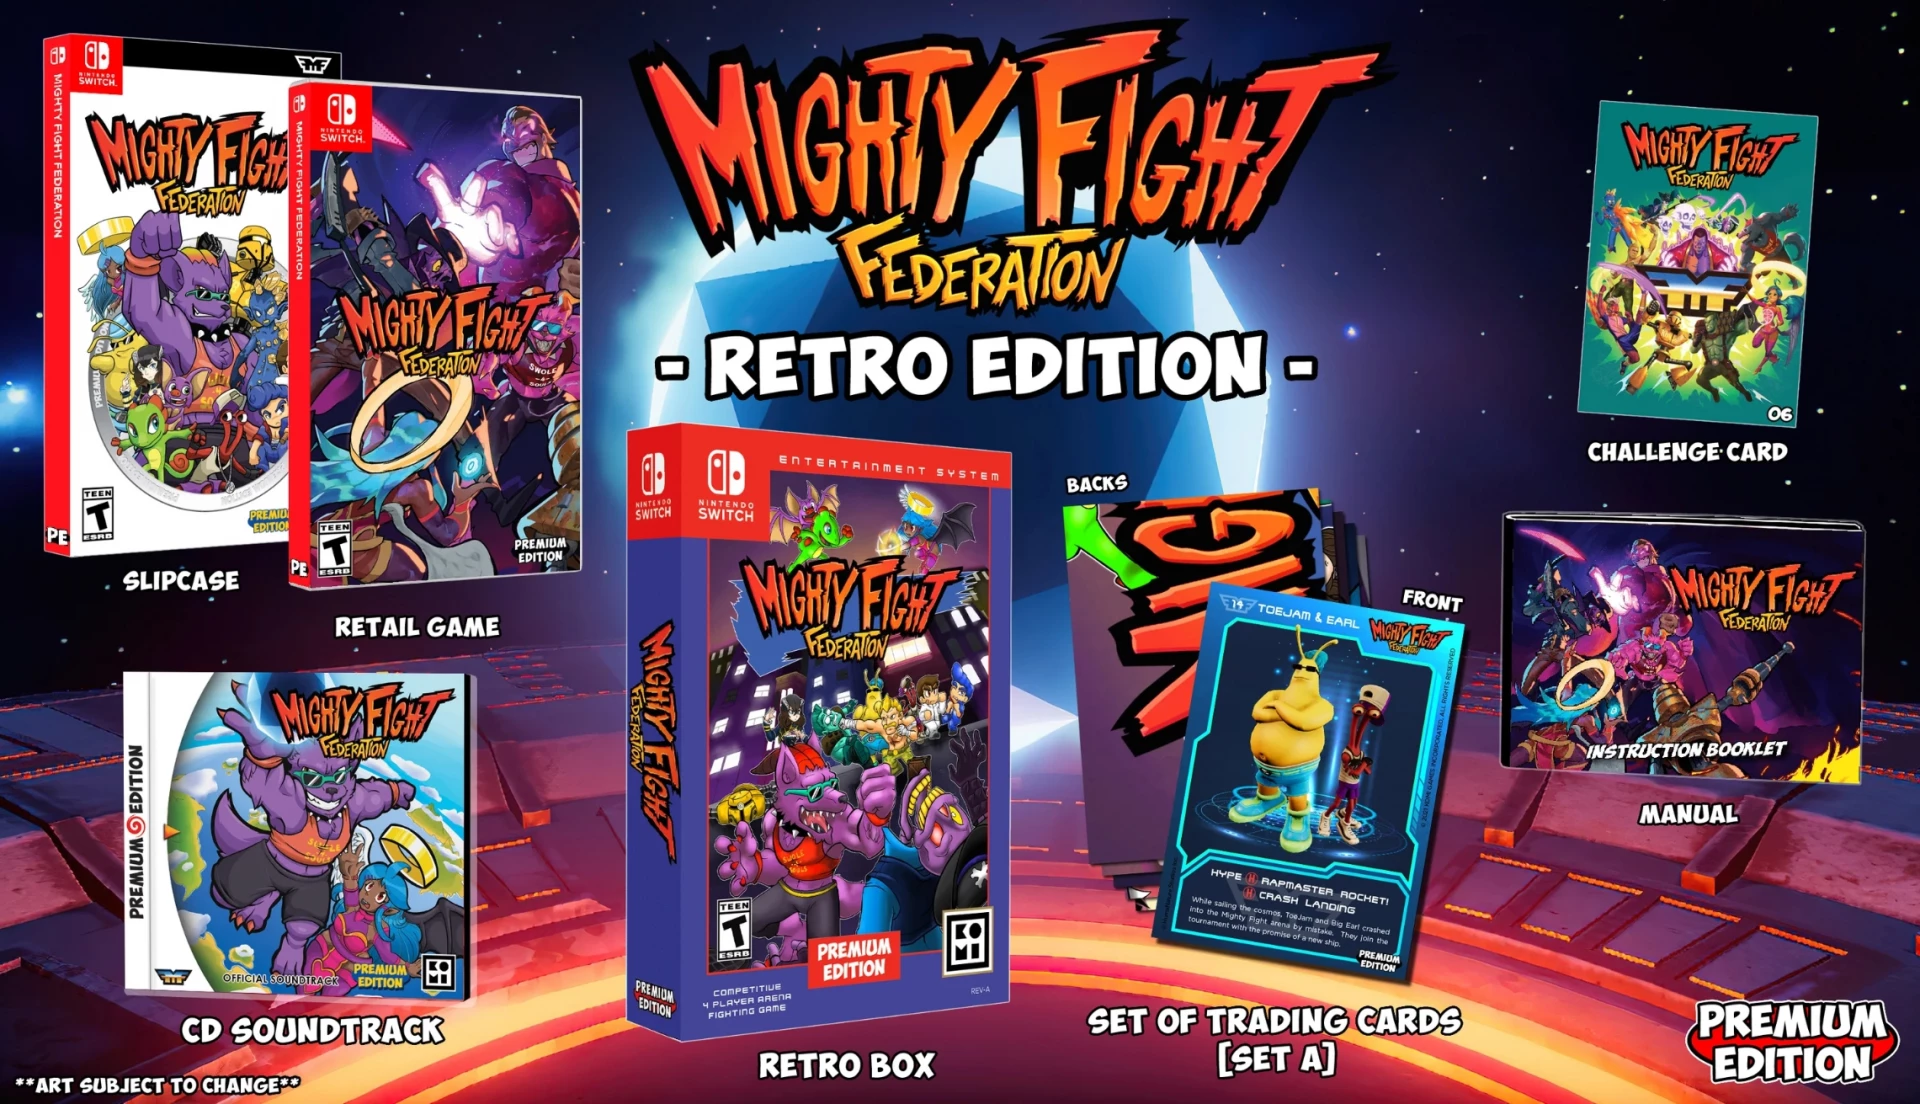 Mighty Fight Federation - Retro Edition (USA Import) (Switch), Premium Edition Games